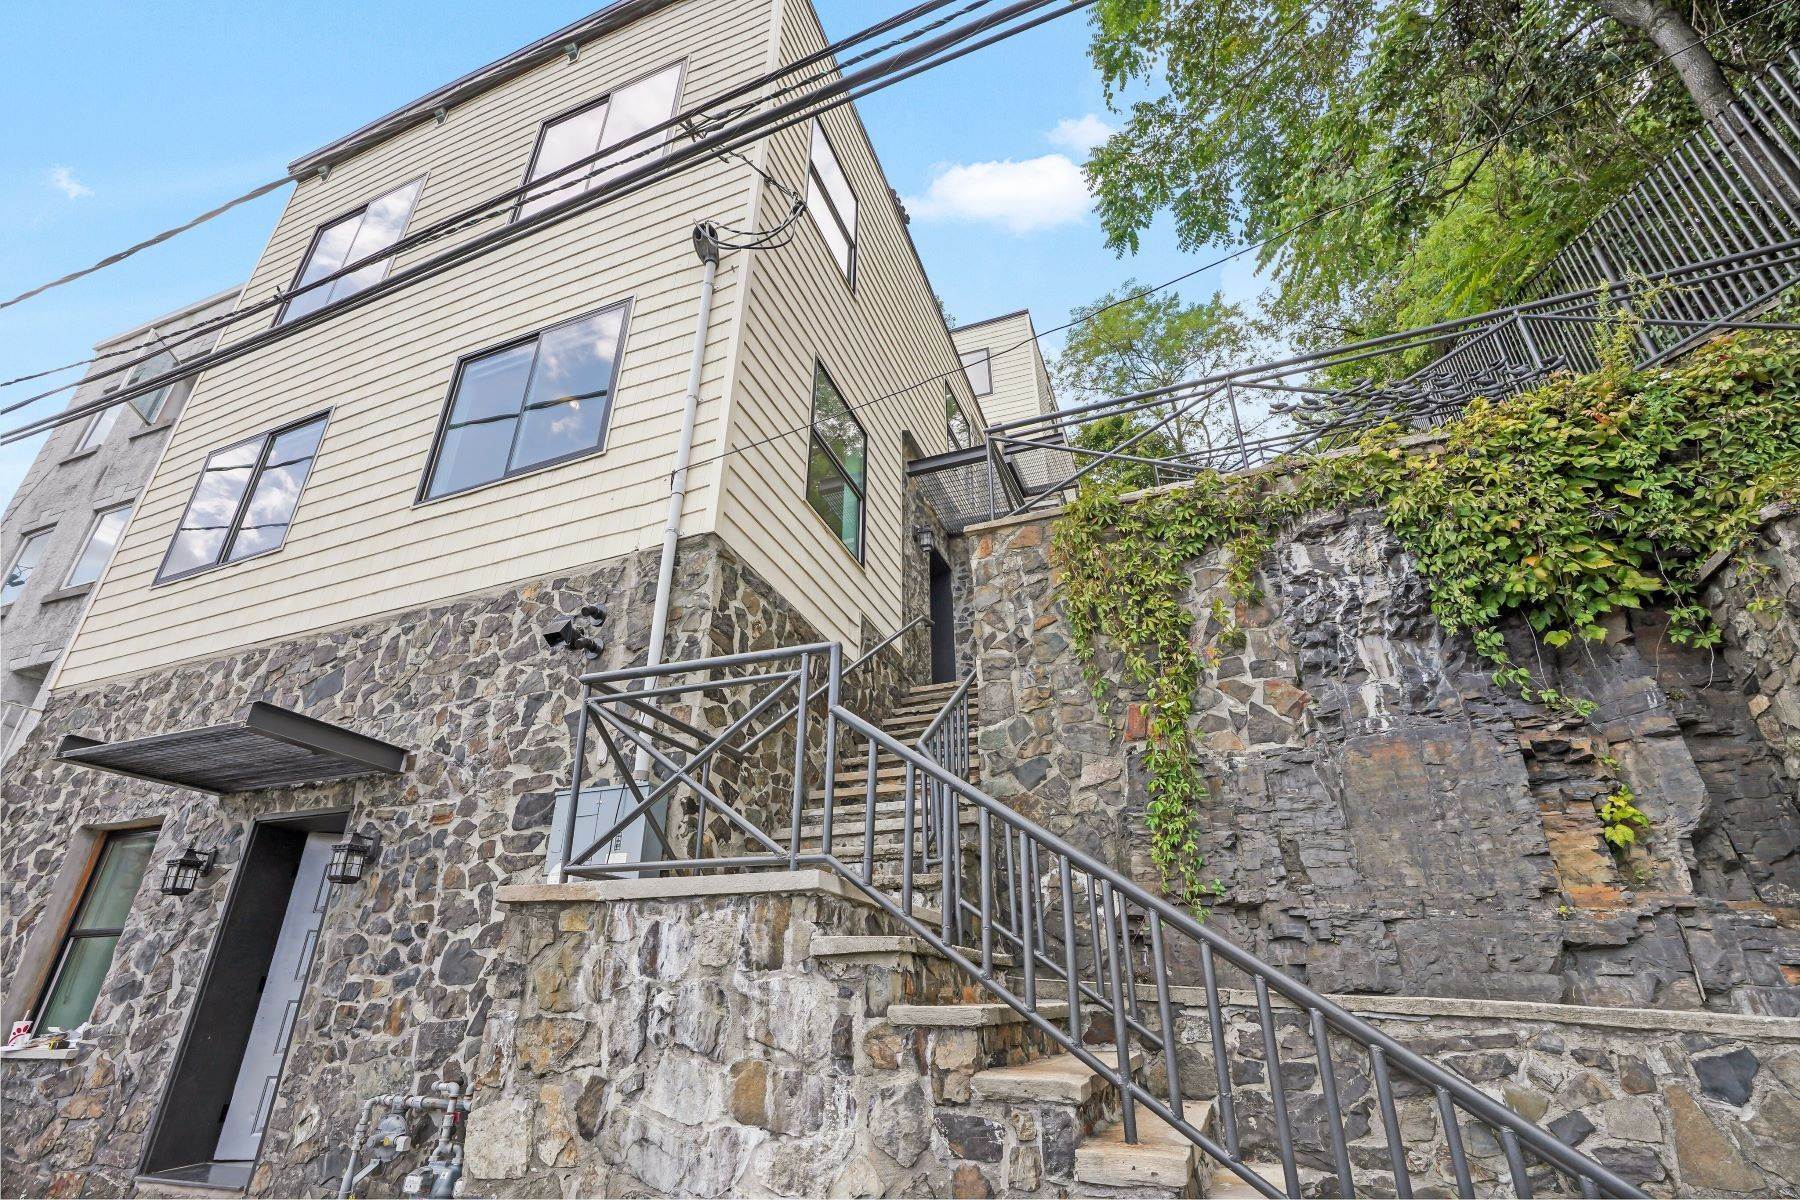 Multi-Family Homes for Sale at Renovated Loft Like Building with Three 2BR Apts or Condos! 9009 Riverside Pl. North Bergen, New Jersey 07047 United States